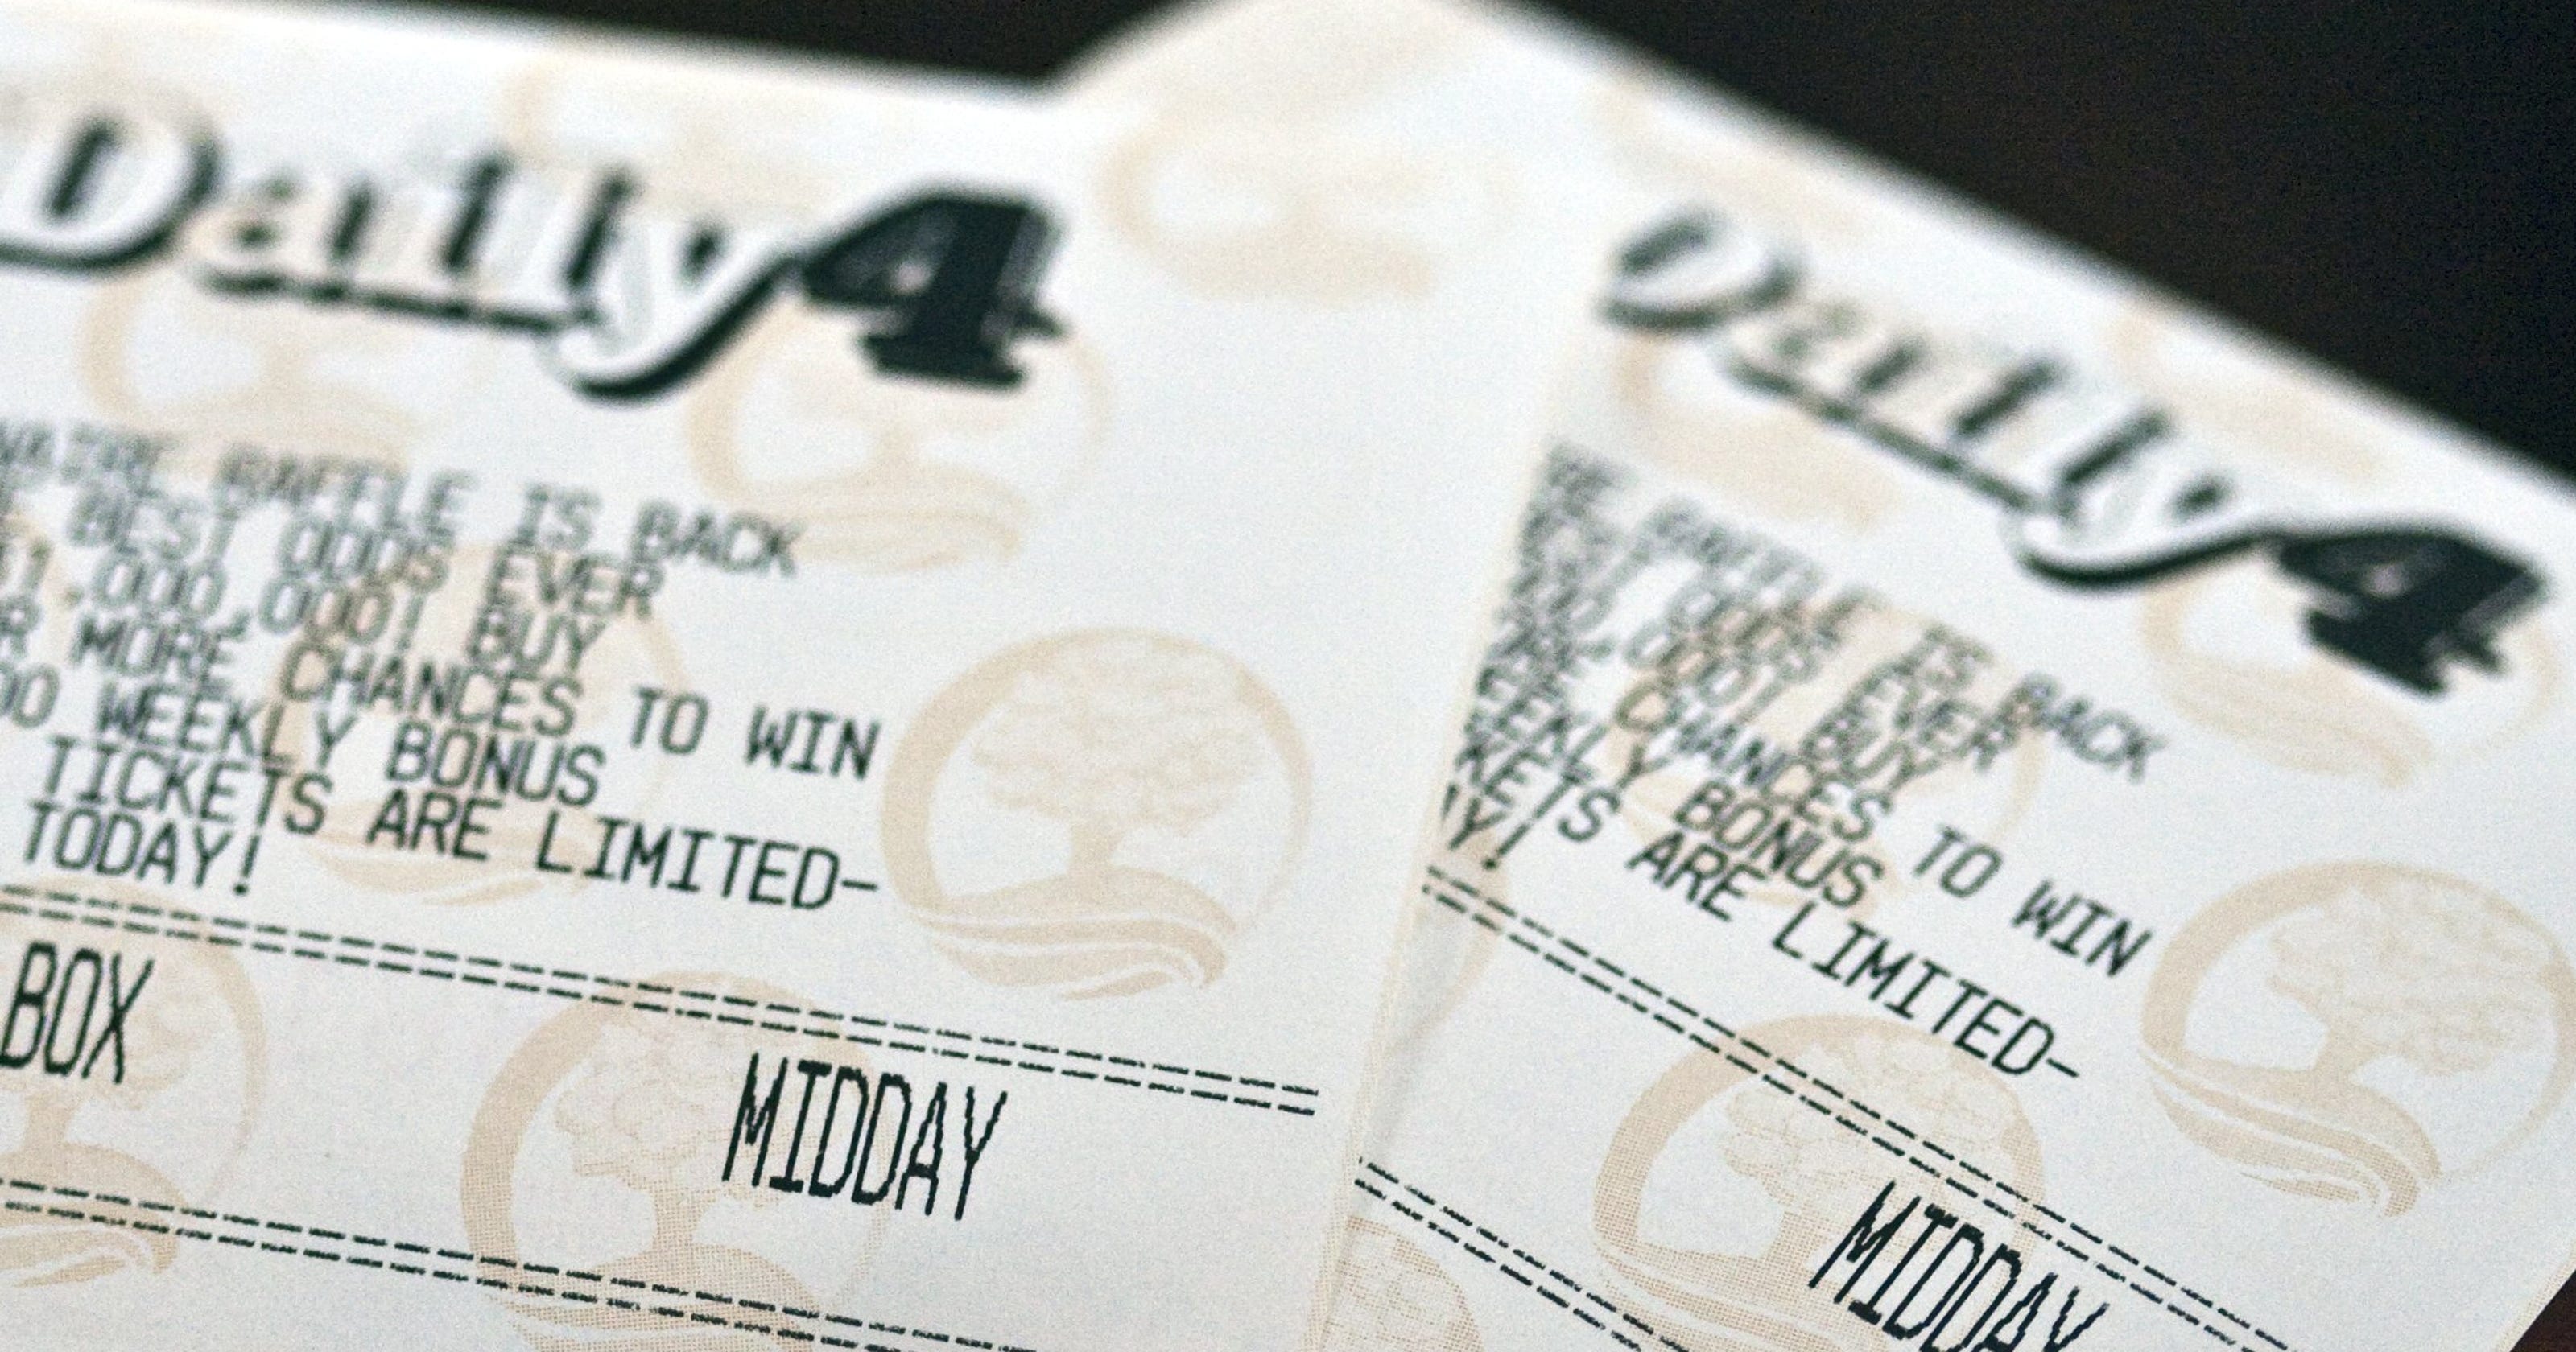 Michigan lottery tickets with 4 zeroes are worth $5 000